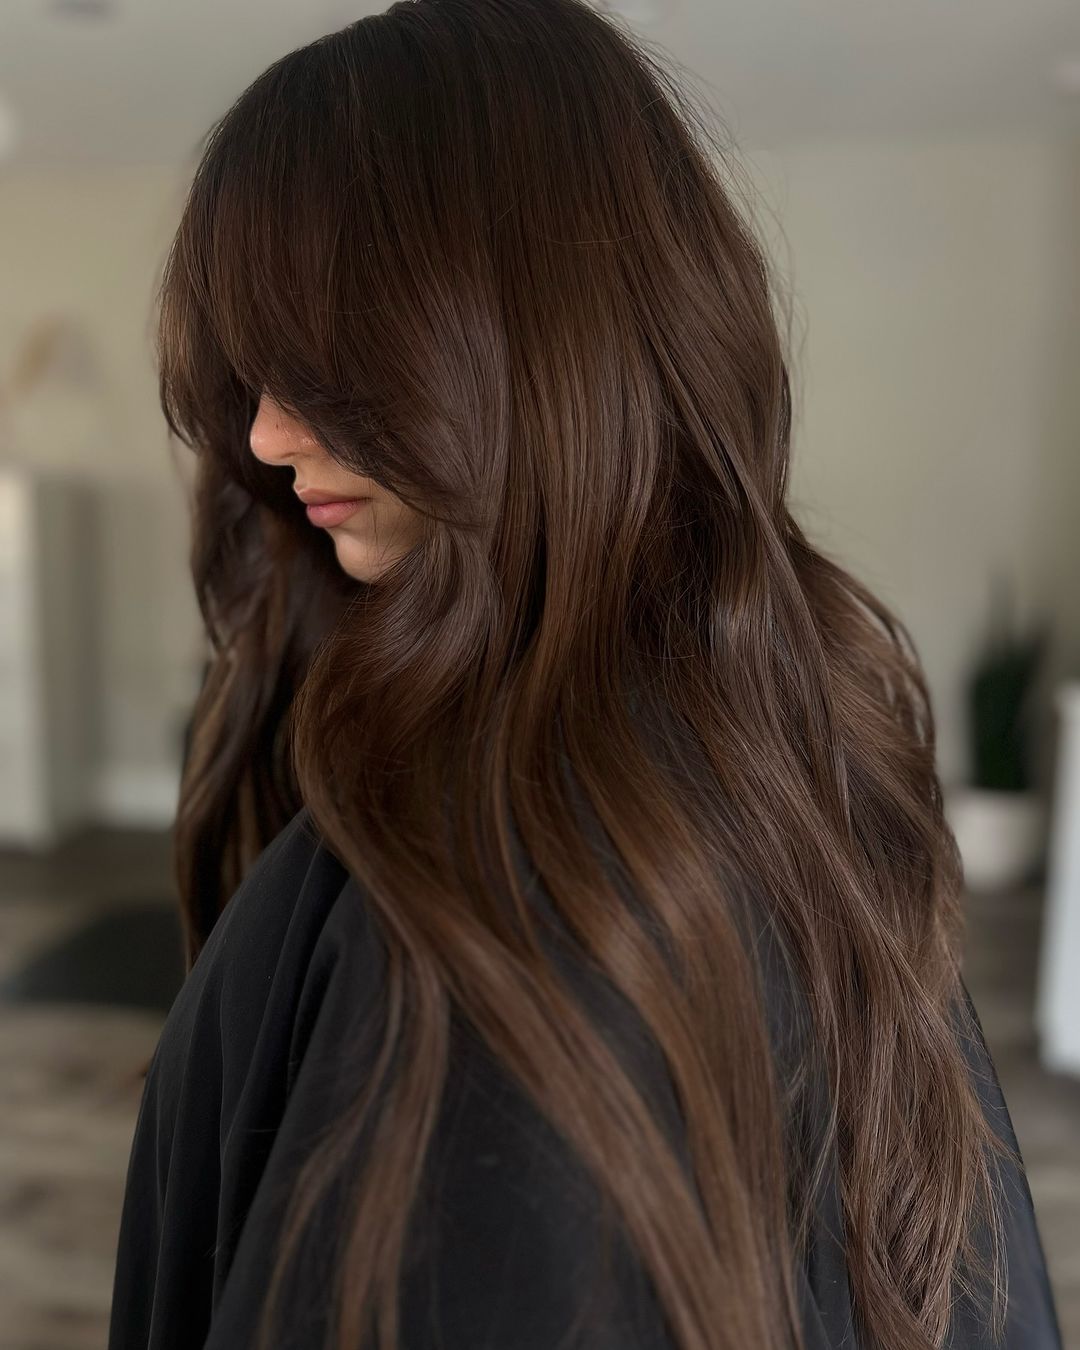 Choosing the Right Hair Color Key Considerations and Tips